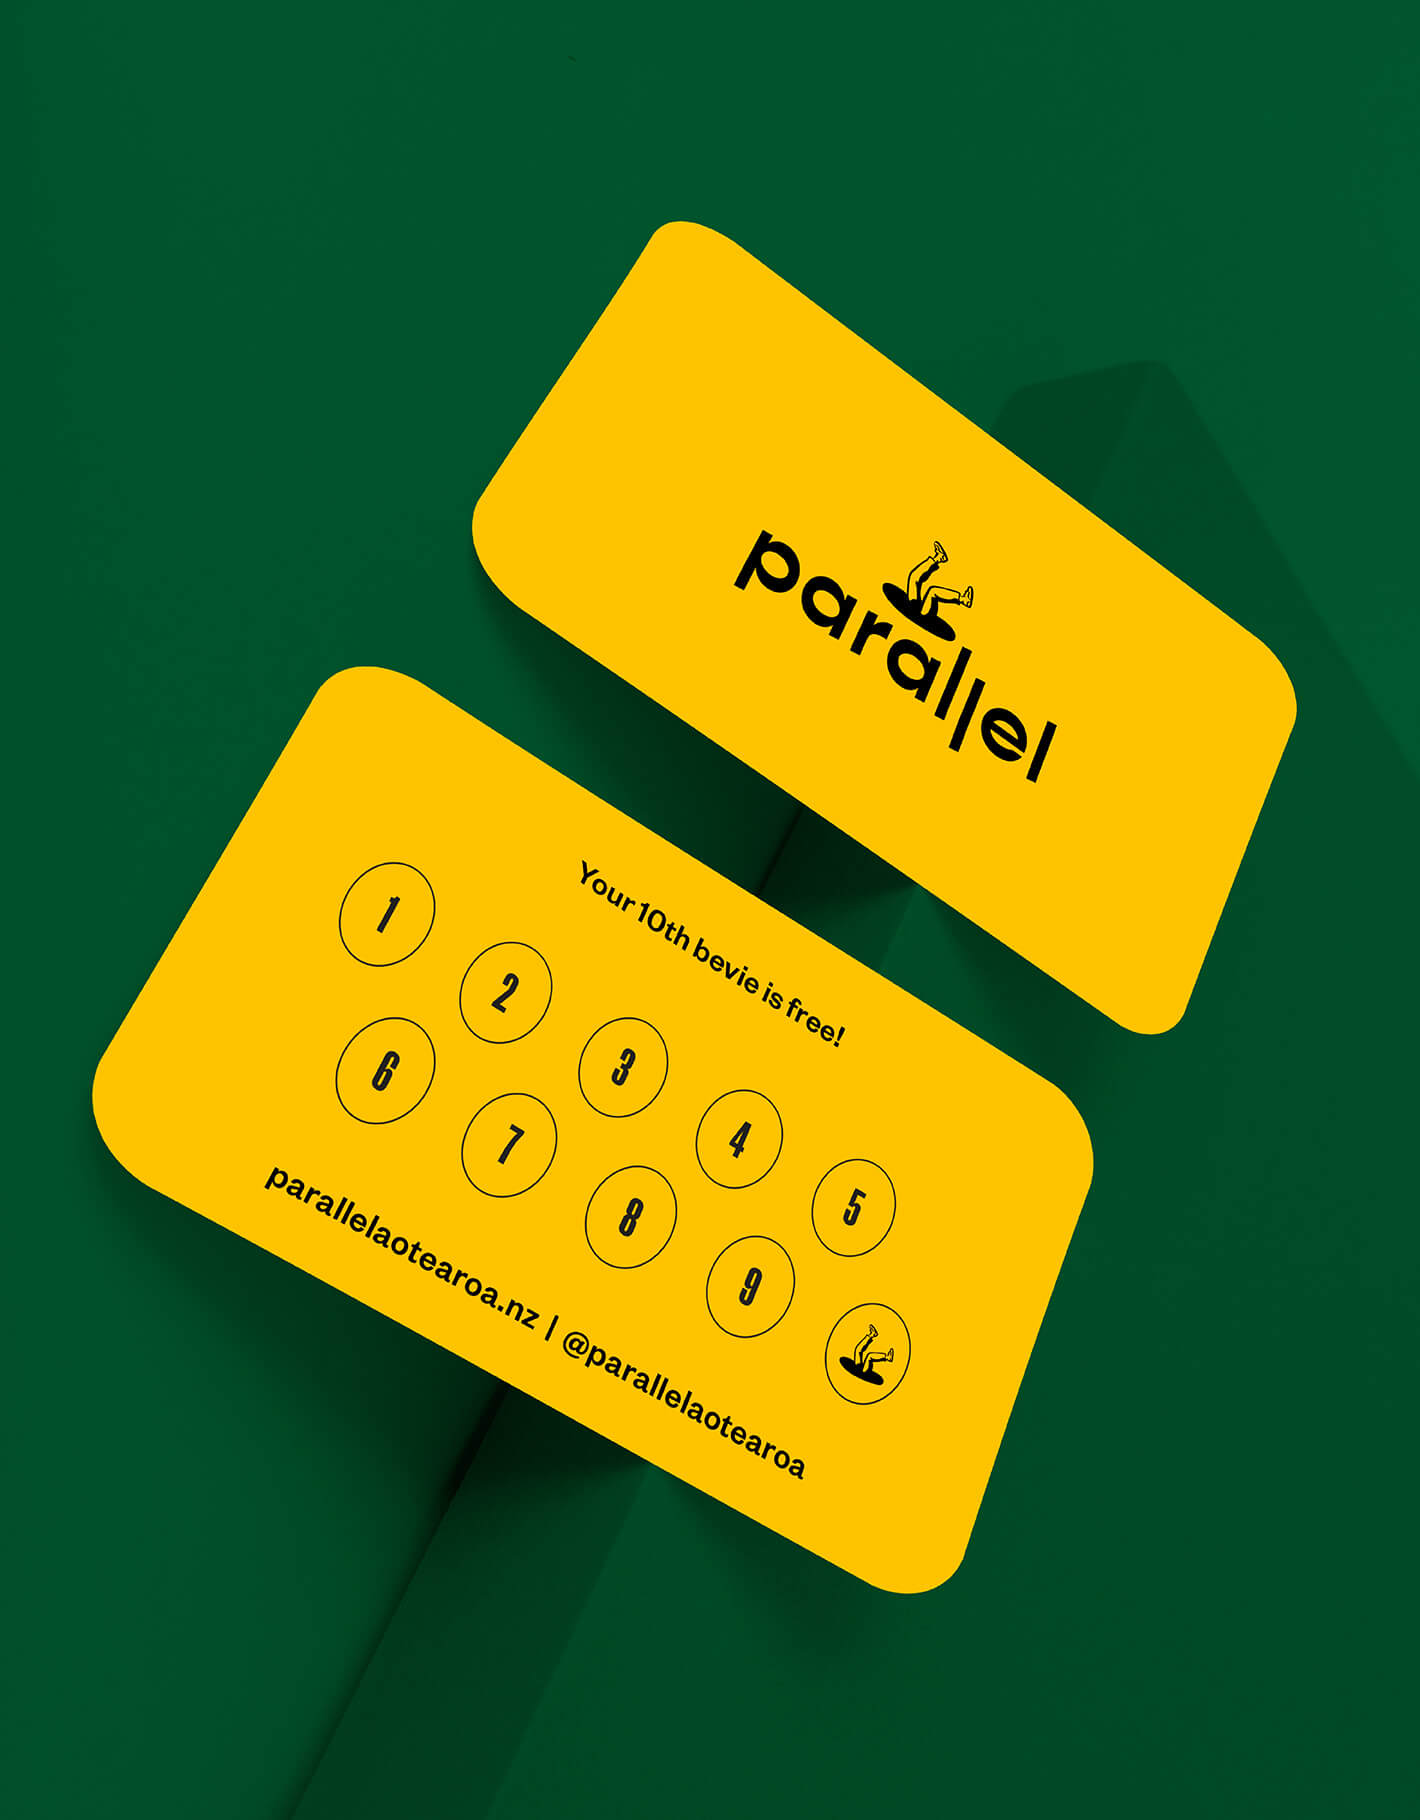 Brand identity case study for Parallel shows a coffee loyalty card. Printed on bold yellow stock, the front features a logo while the back has a stamp section to mark off.